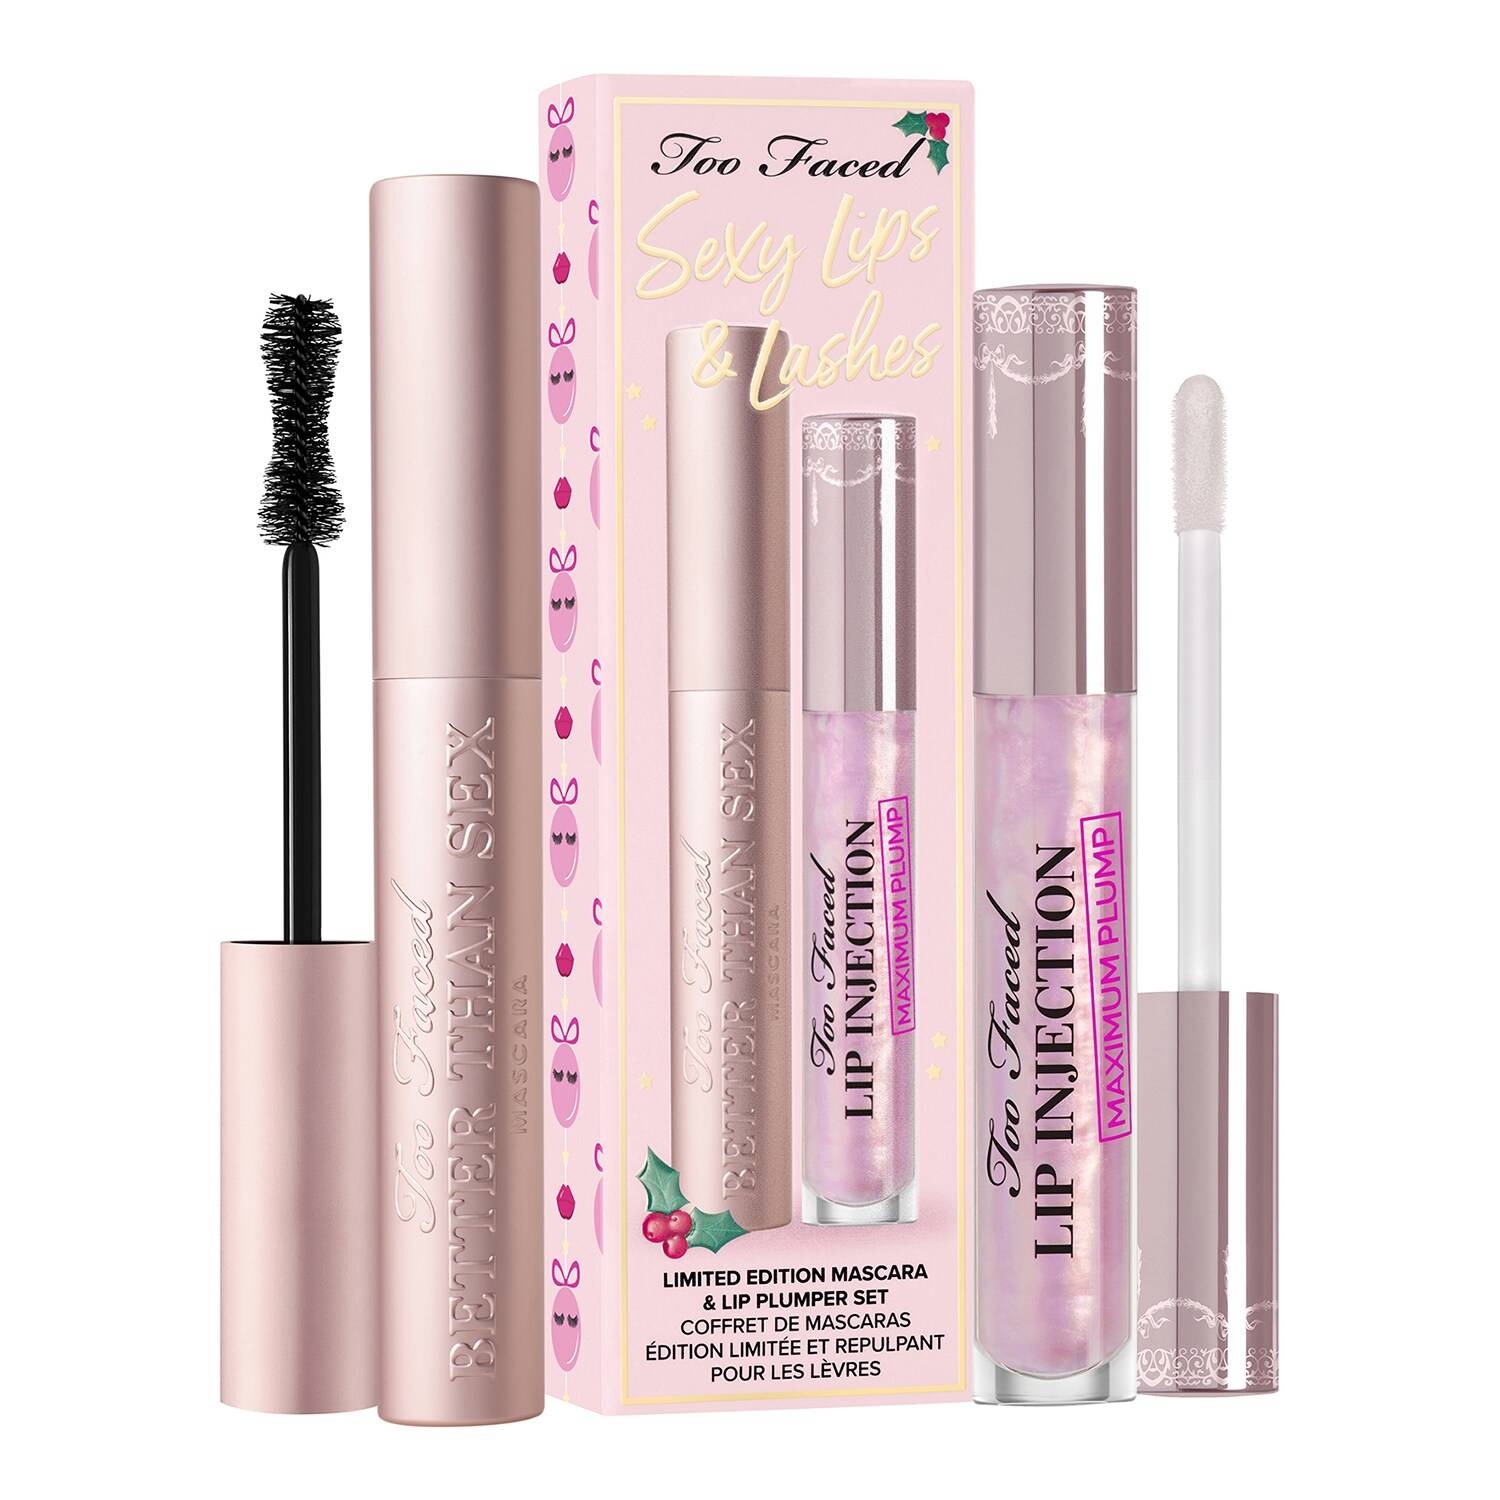 Too Faced Sexy Lips & Lashes - Makeup Set